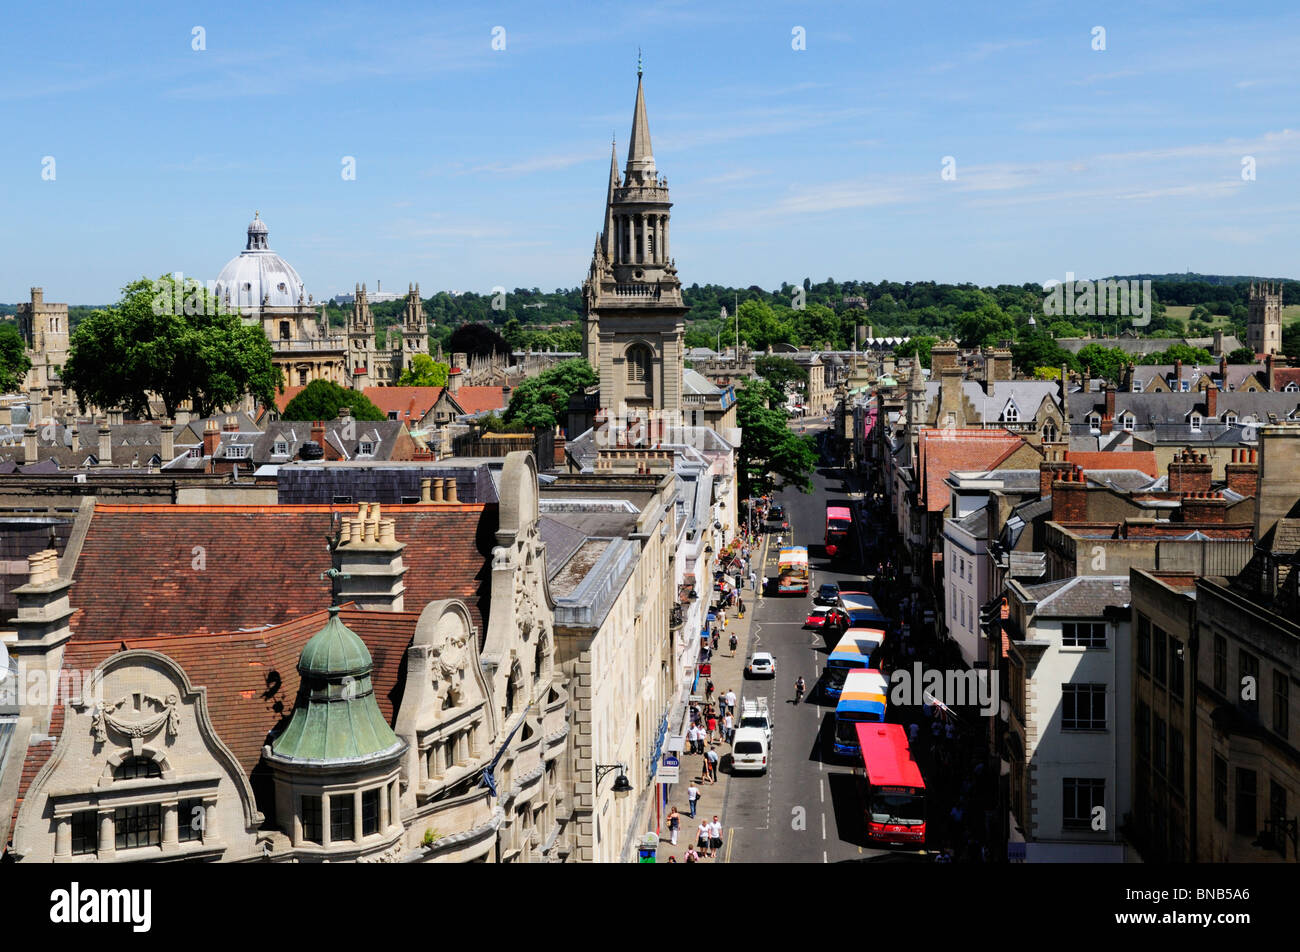 View of Oxford from Carfax Tower, Oxford, England, UK Stock Photo